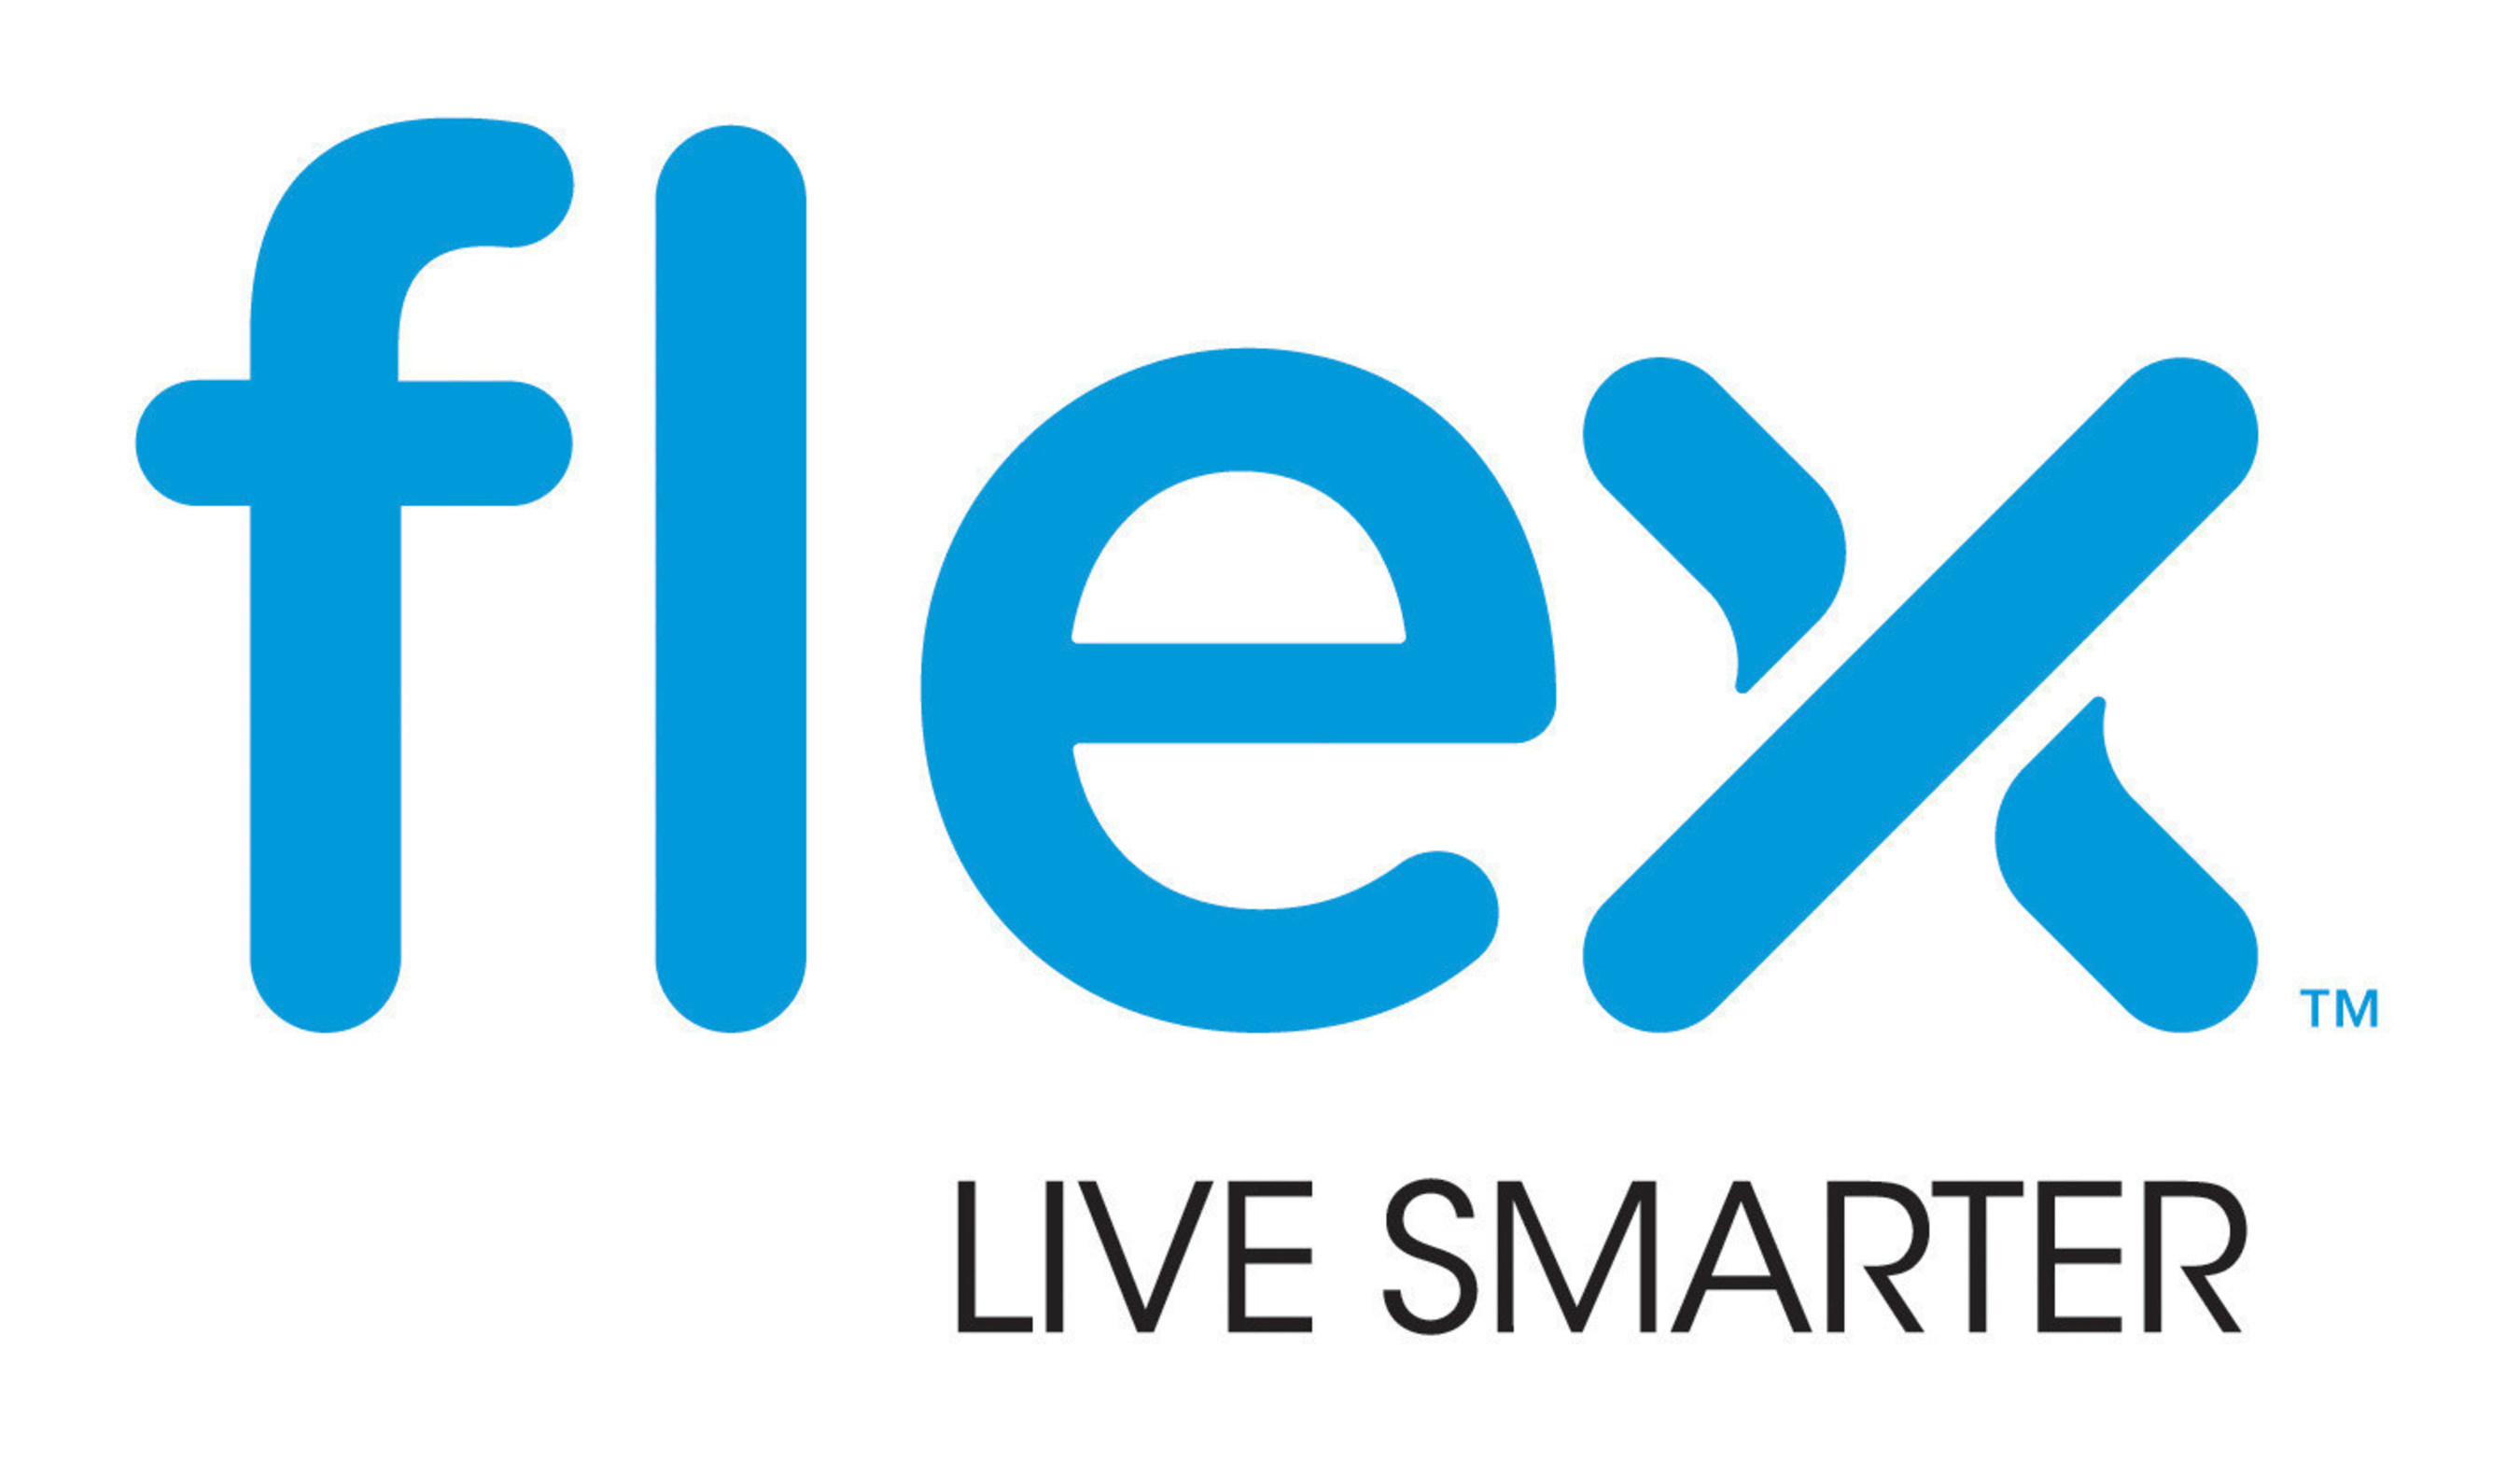 Flextronics Officially Changes Name to Flex